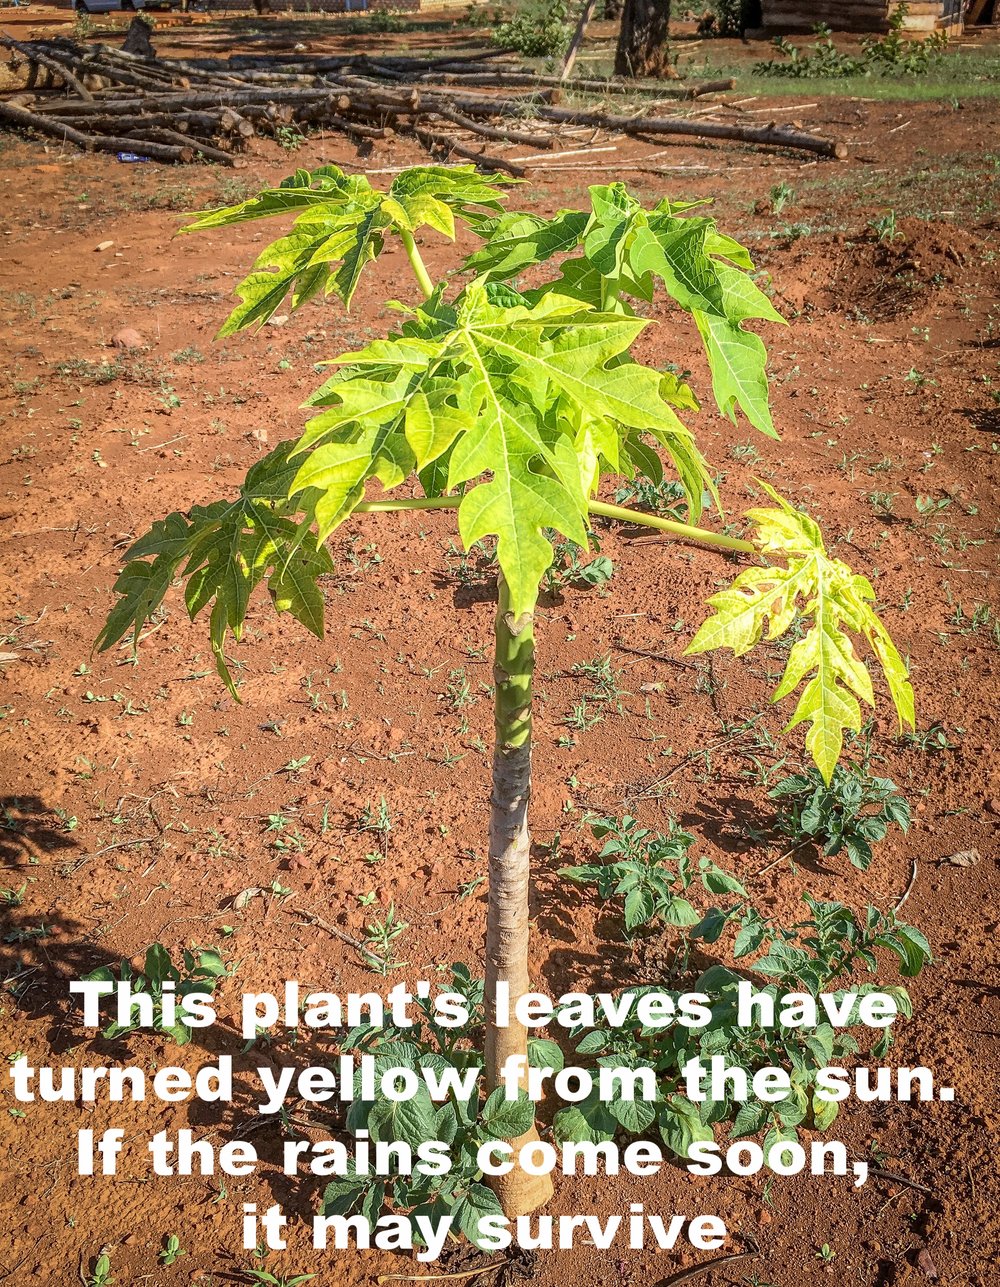 This has turn yellow, may be if it rains this can survive.jpg